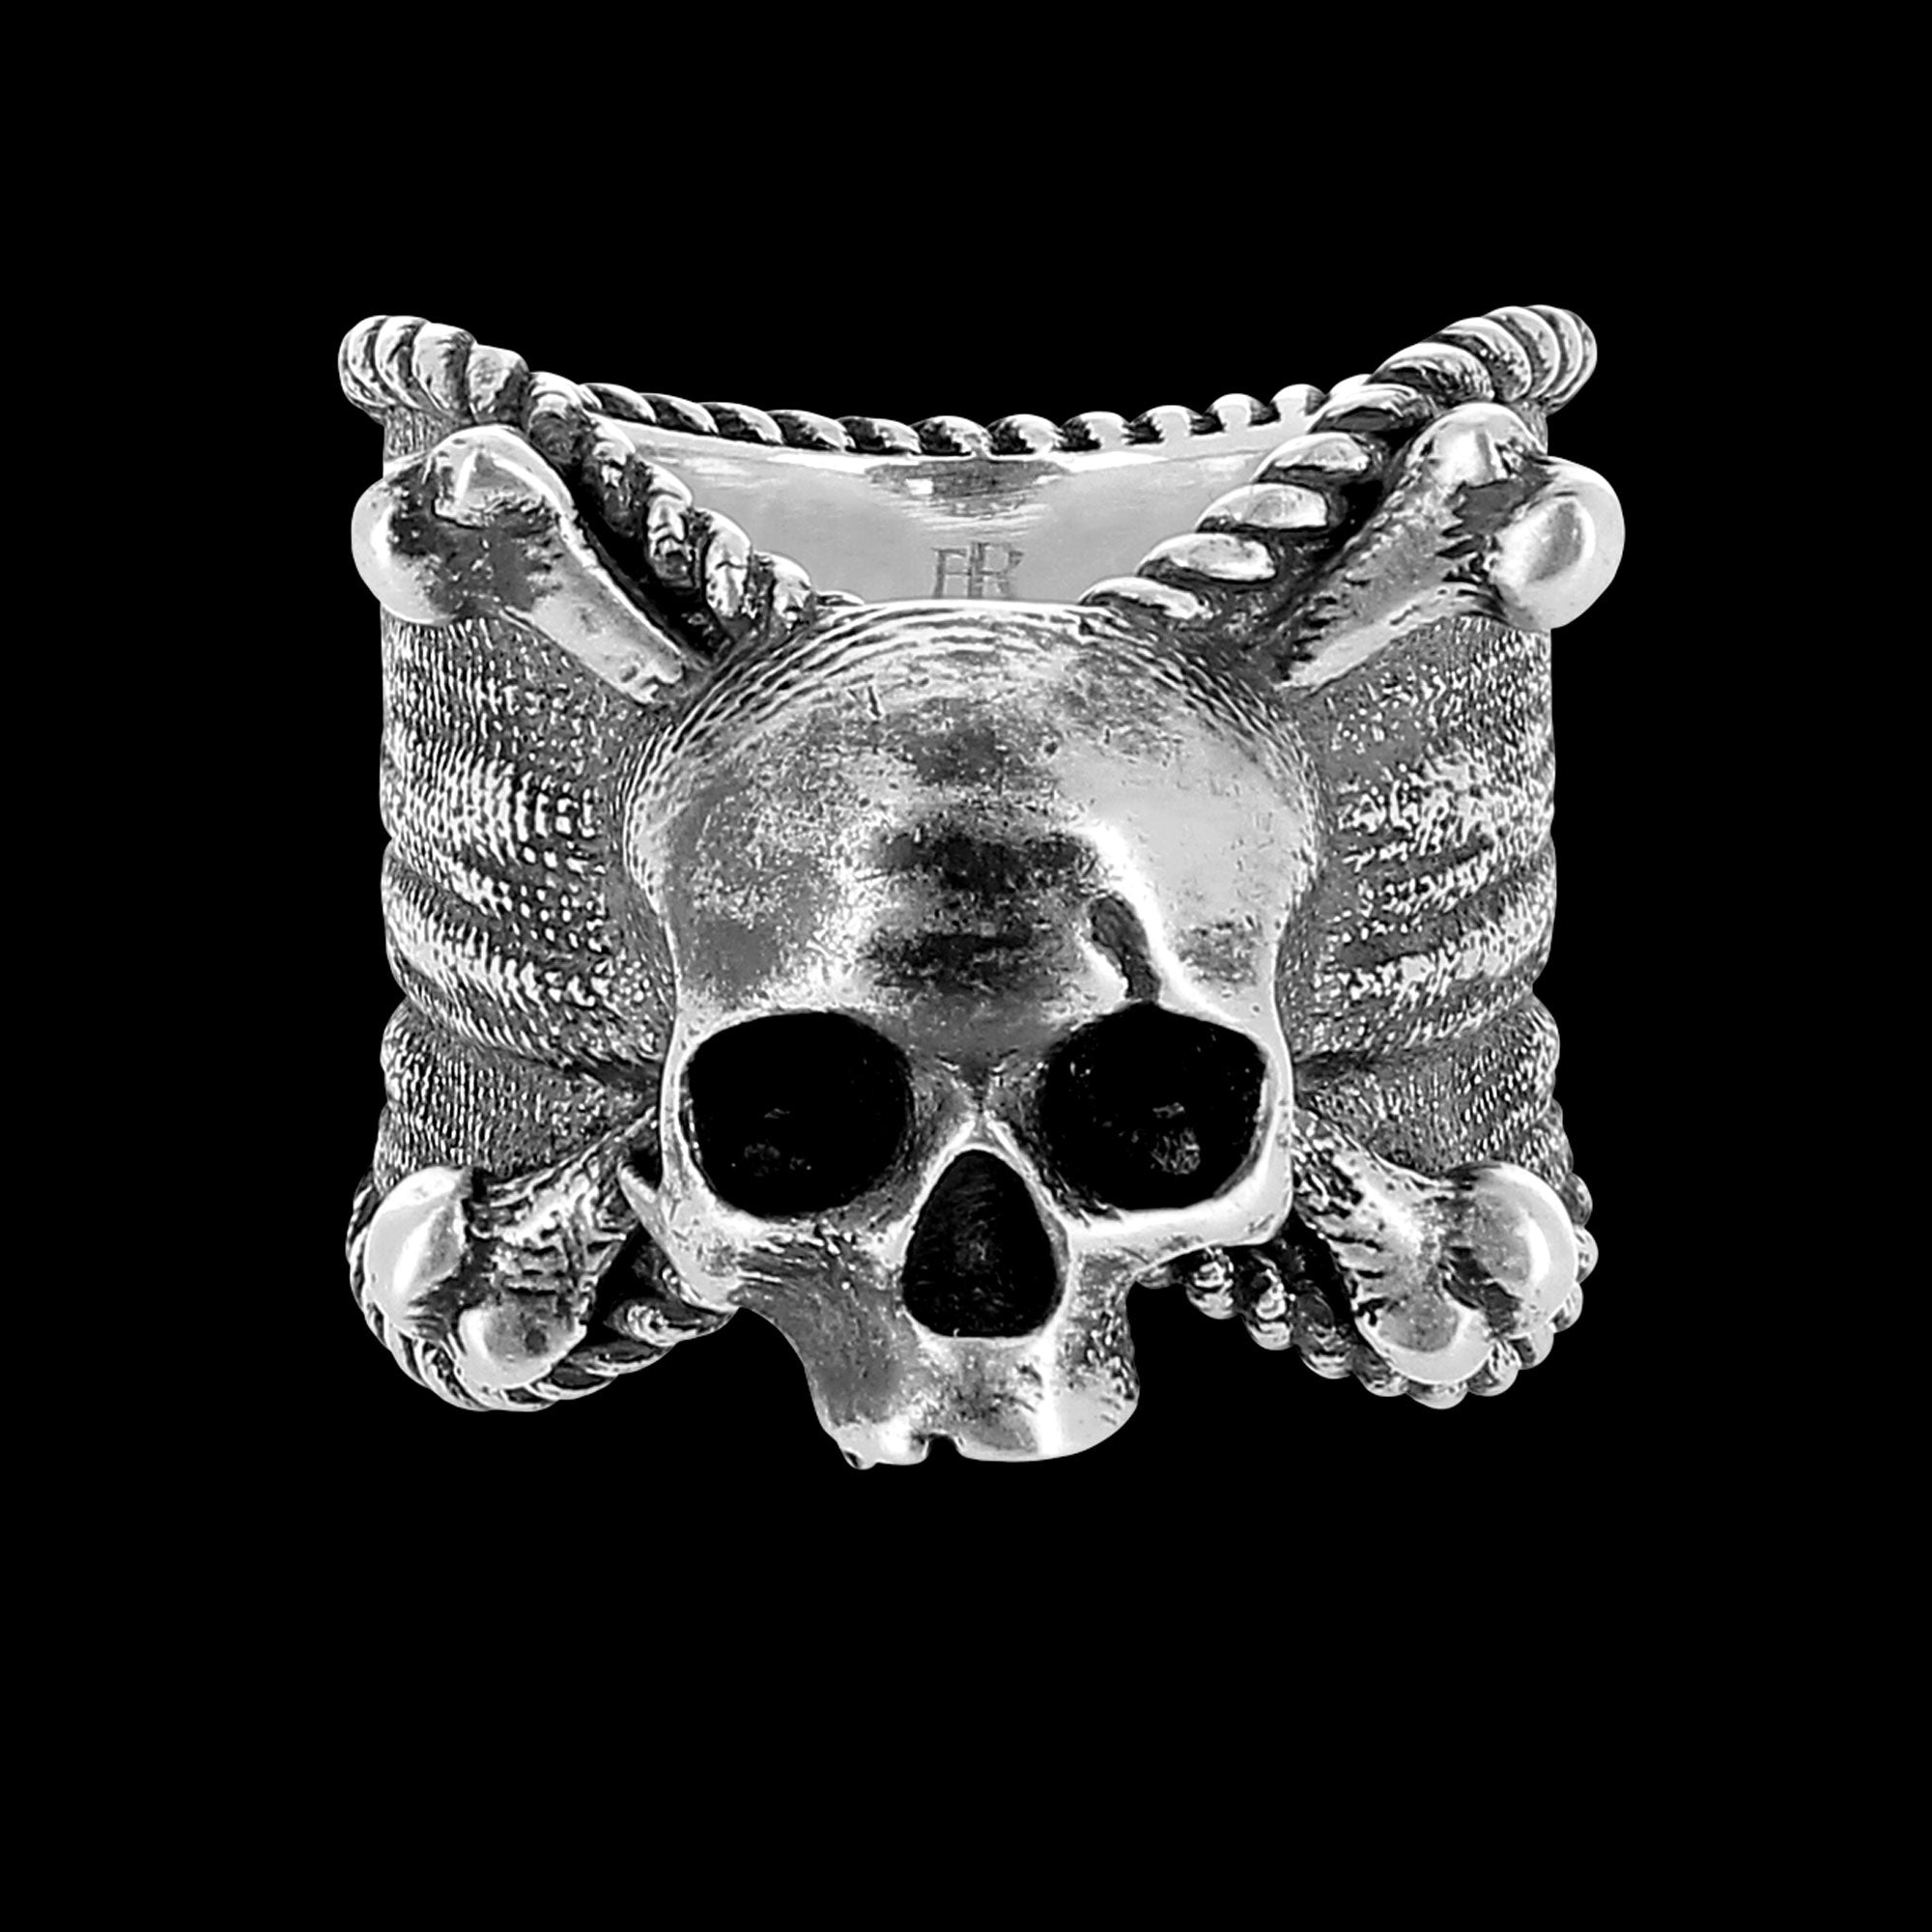 The Pirate's Mark - Sterling Silver Skull Ring